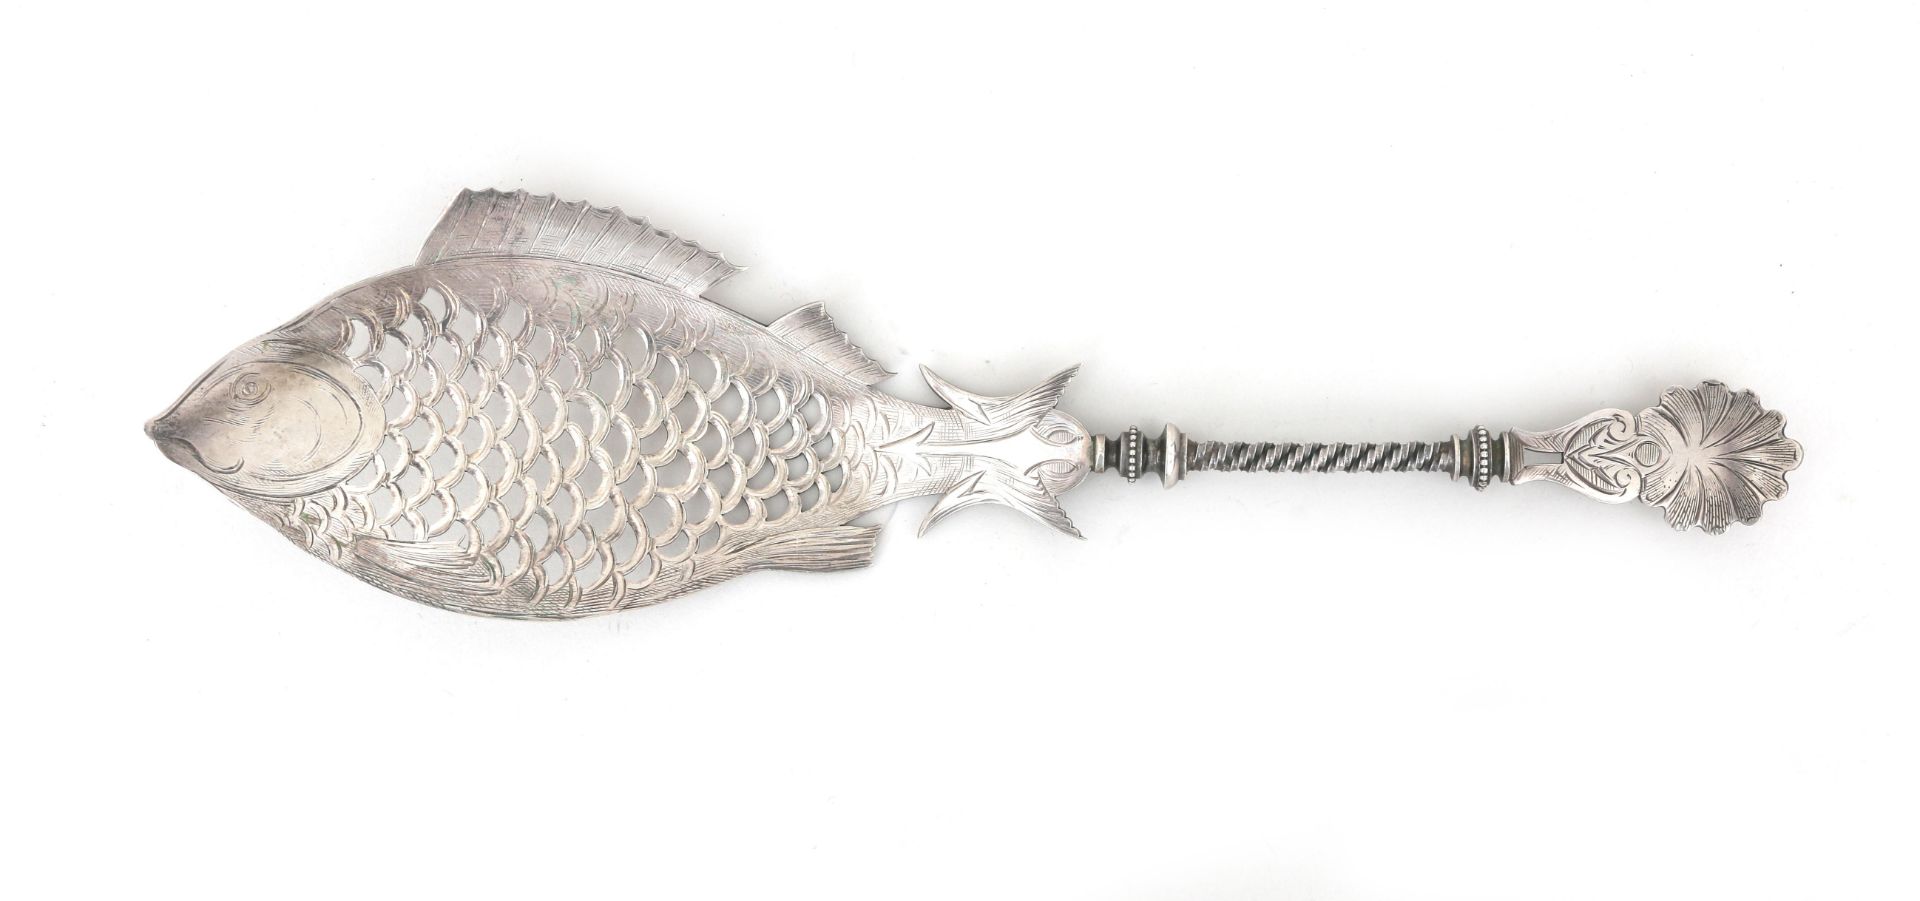 A pierced 835 silver fish slice depicting a fish, with leave finial, maker's mark: J.M. van